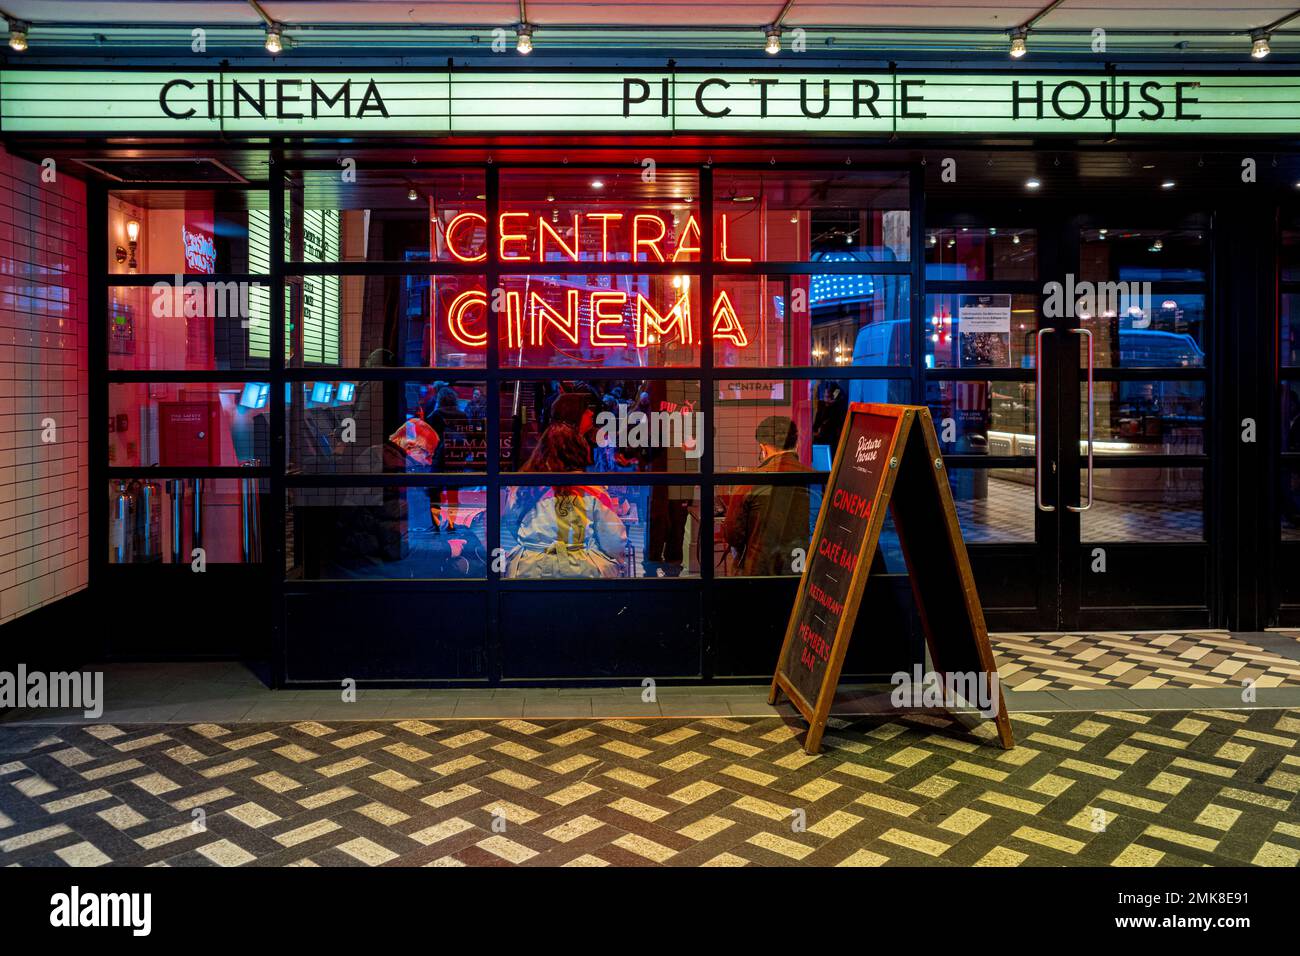 PictureHouse Cinema Foyer London - PictureHouse Central Cinema in der Nähe des Piccadilly Circus im Londoner West End. Picture House Central Cinema London. Stockfoto